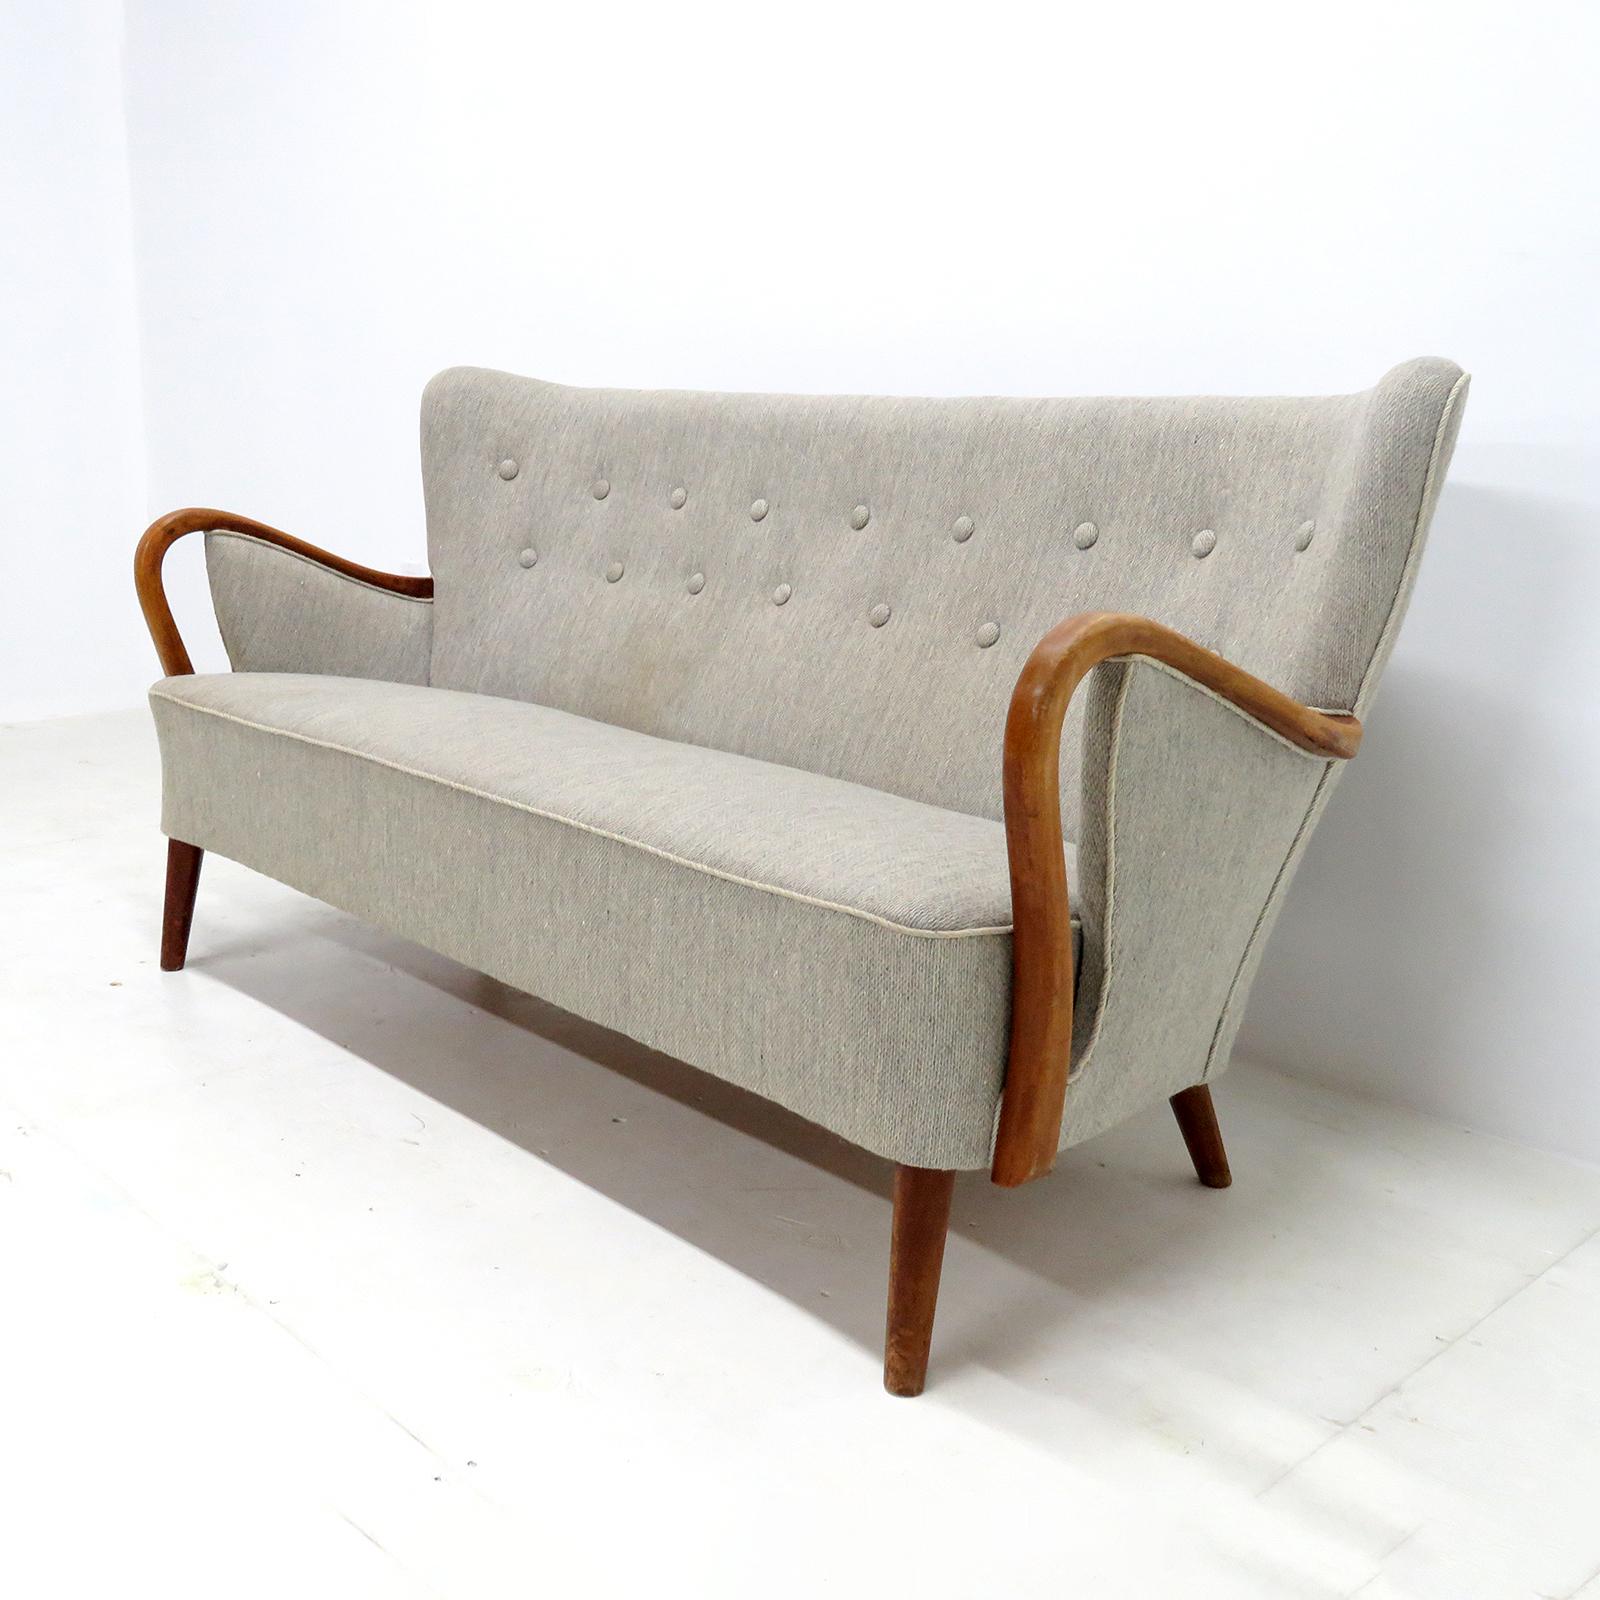 Stained Danish Modern Sofa by DUX, 1940